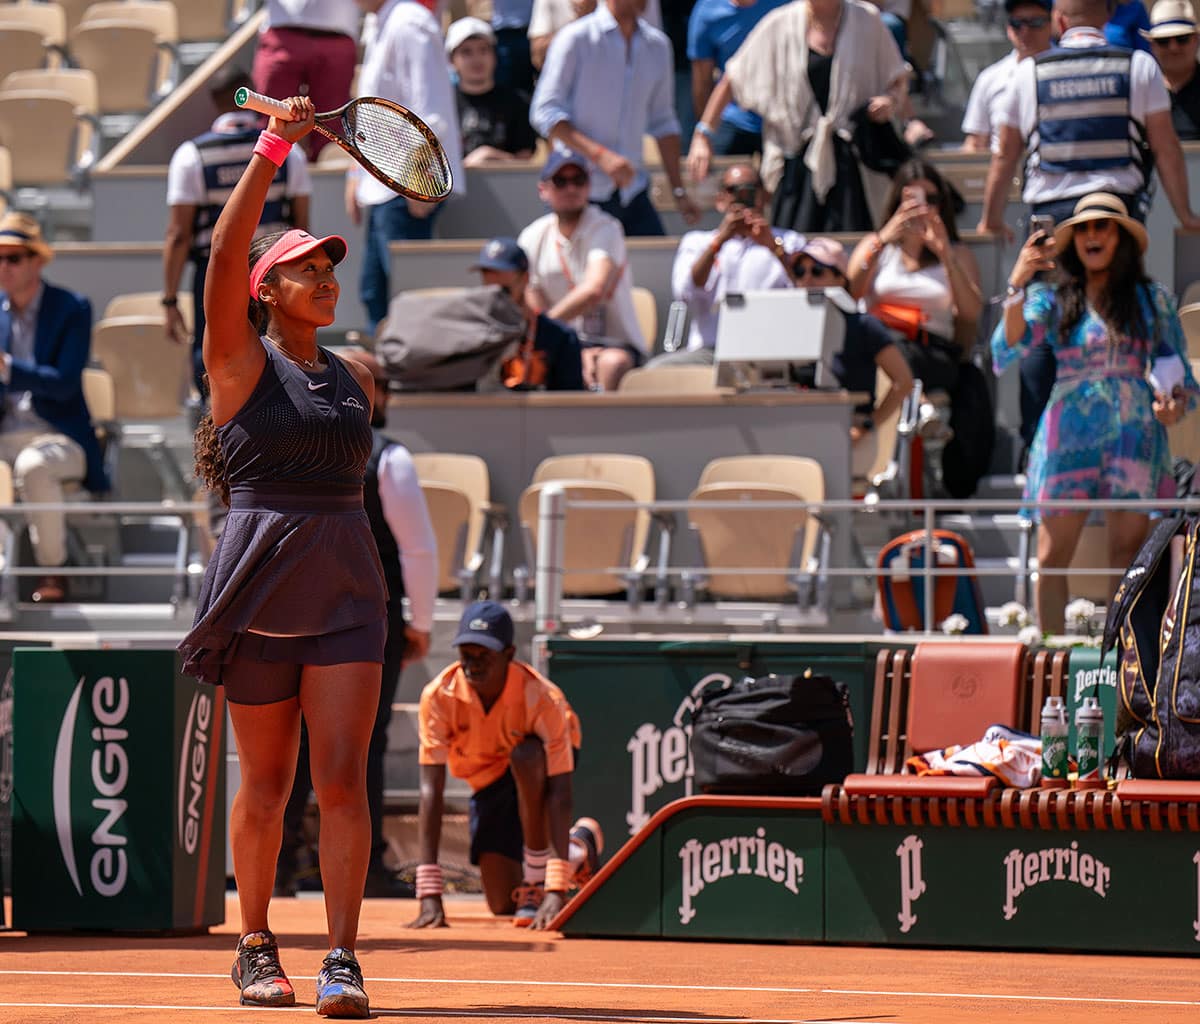 Naomi Osaka of Japan after winning her first round match against Lucia Bronzetti of Italy on day one of Roland Garros.